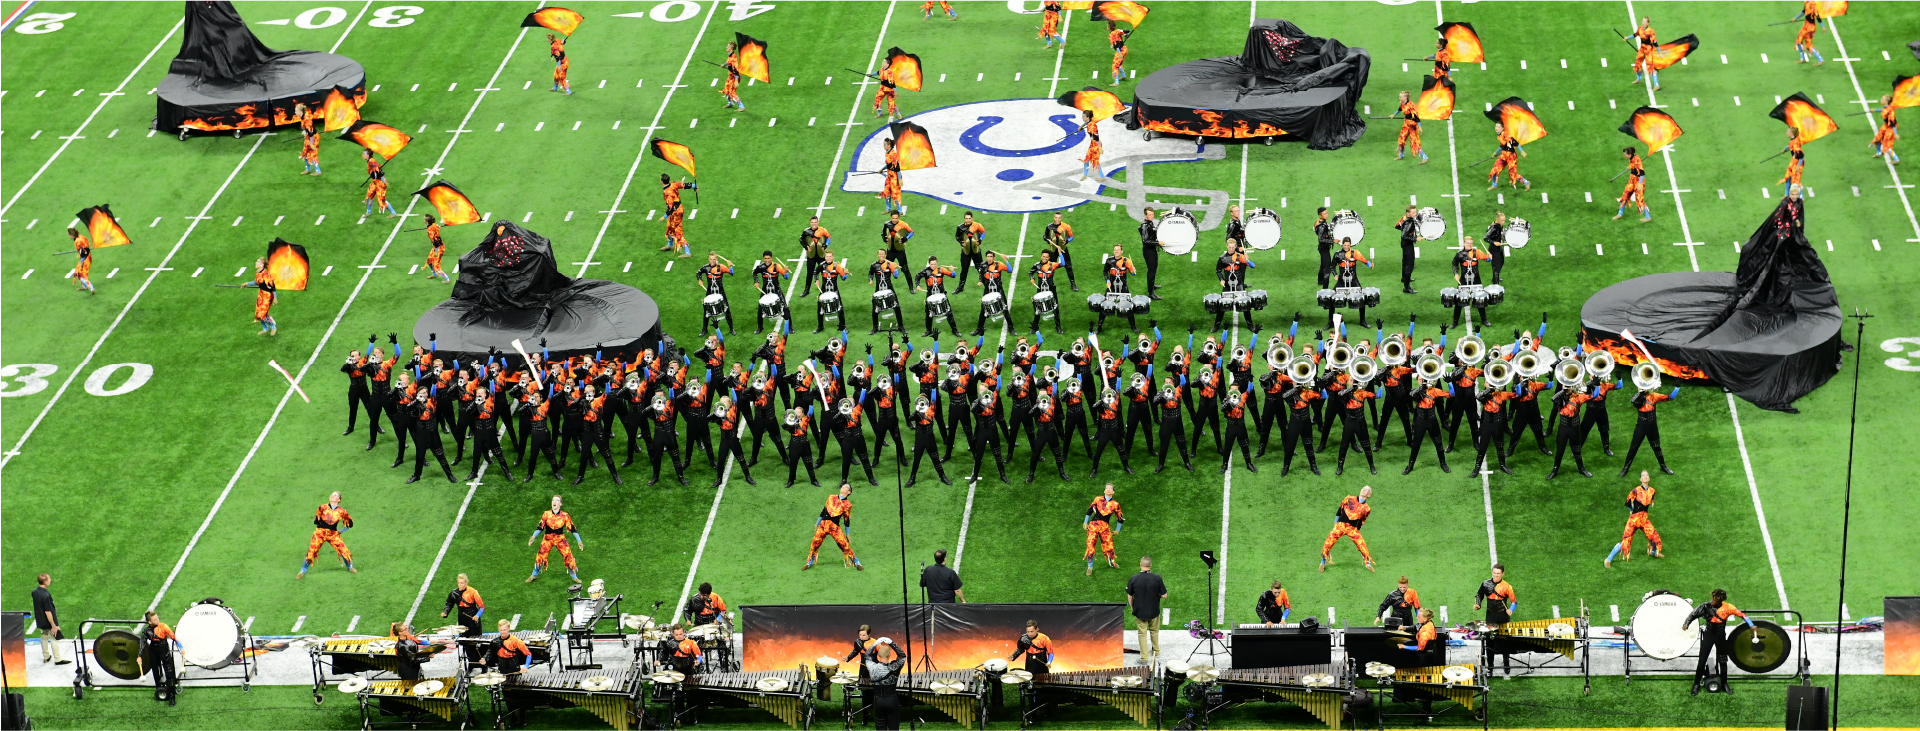 Colts performing at Lucas Oil Stadium